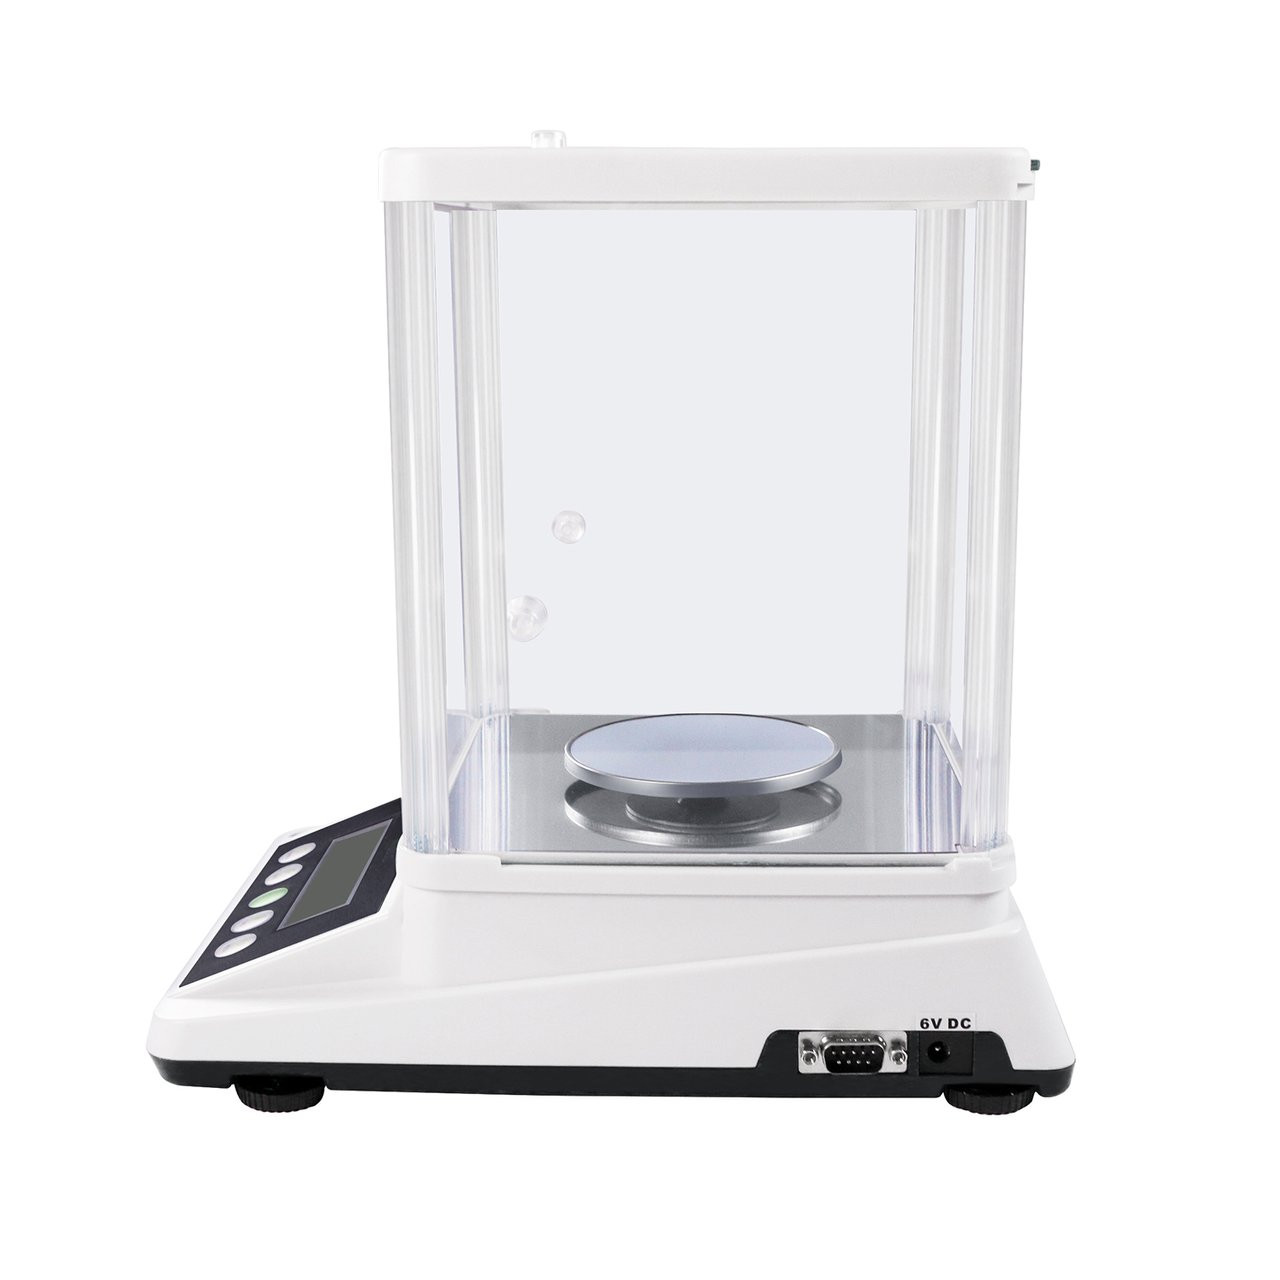 U.S. Solid 300g x 0.001g 1mg Digital Analytical Balance Precision Scale for Laboratories RS232 Interface